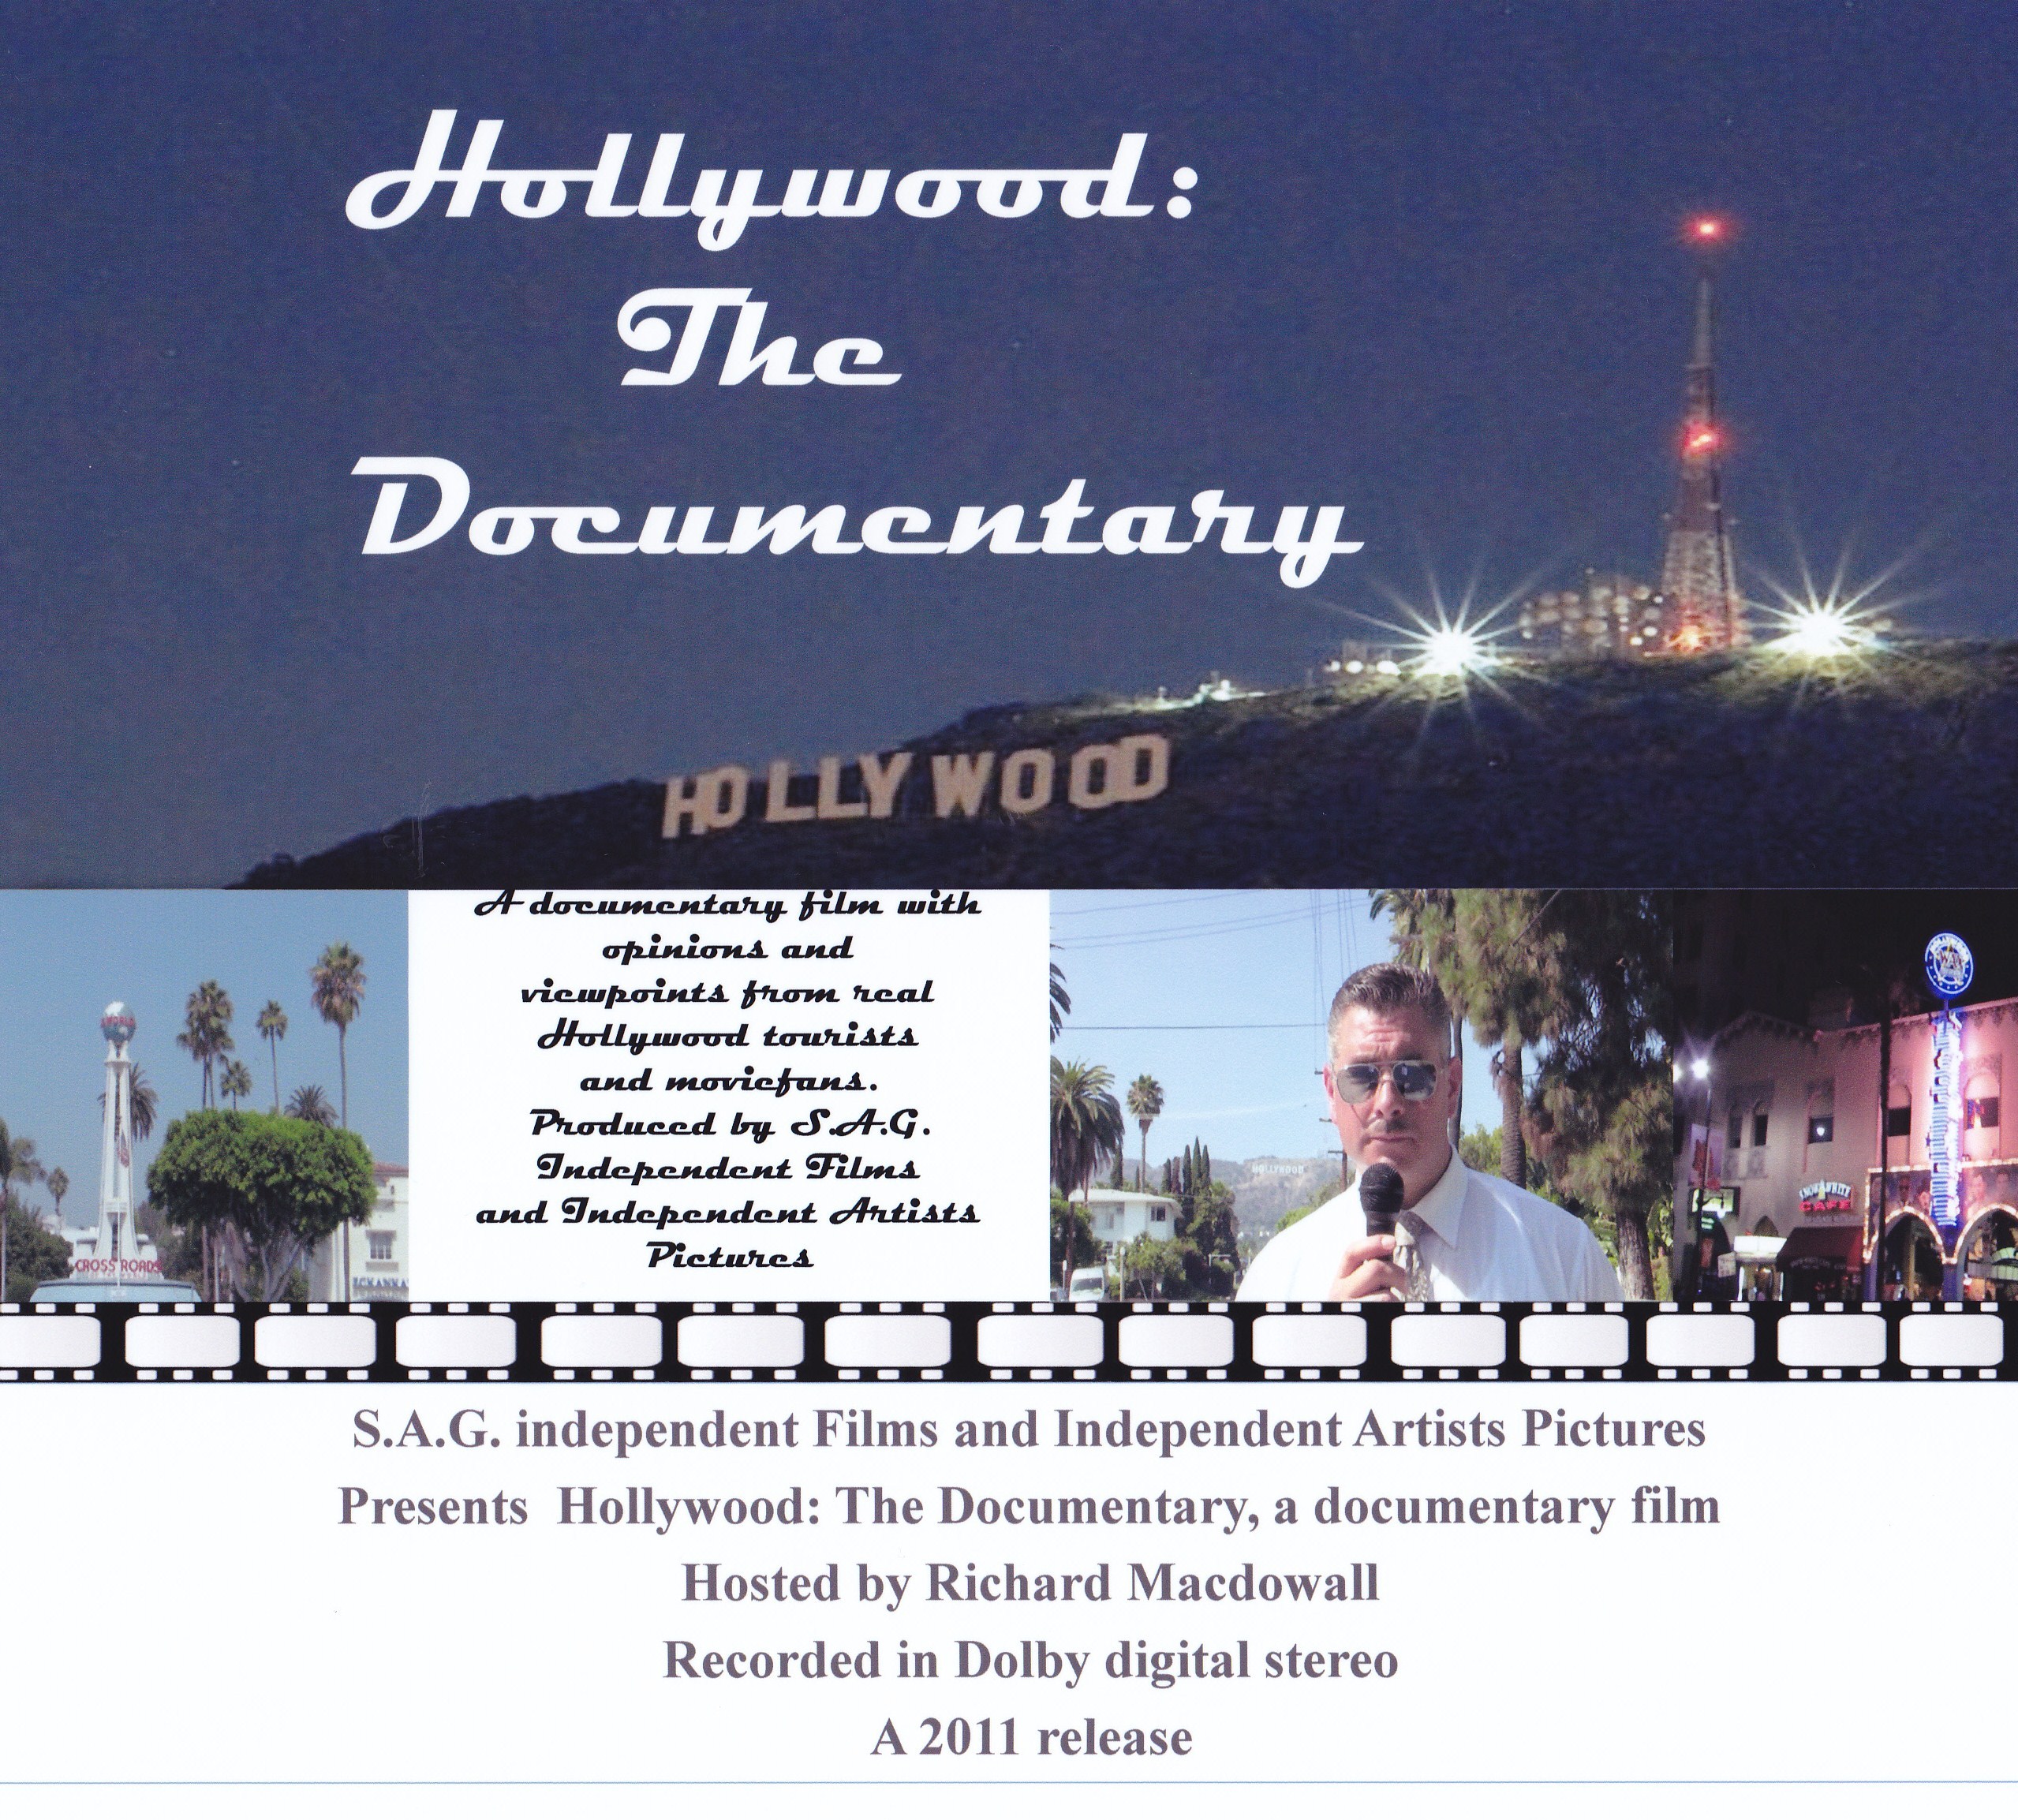 The poster for 'Hollywood: The Documentary